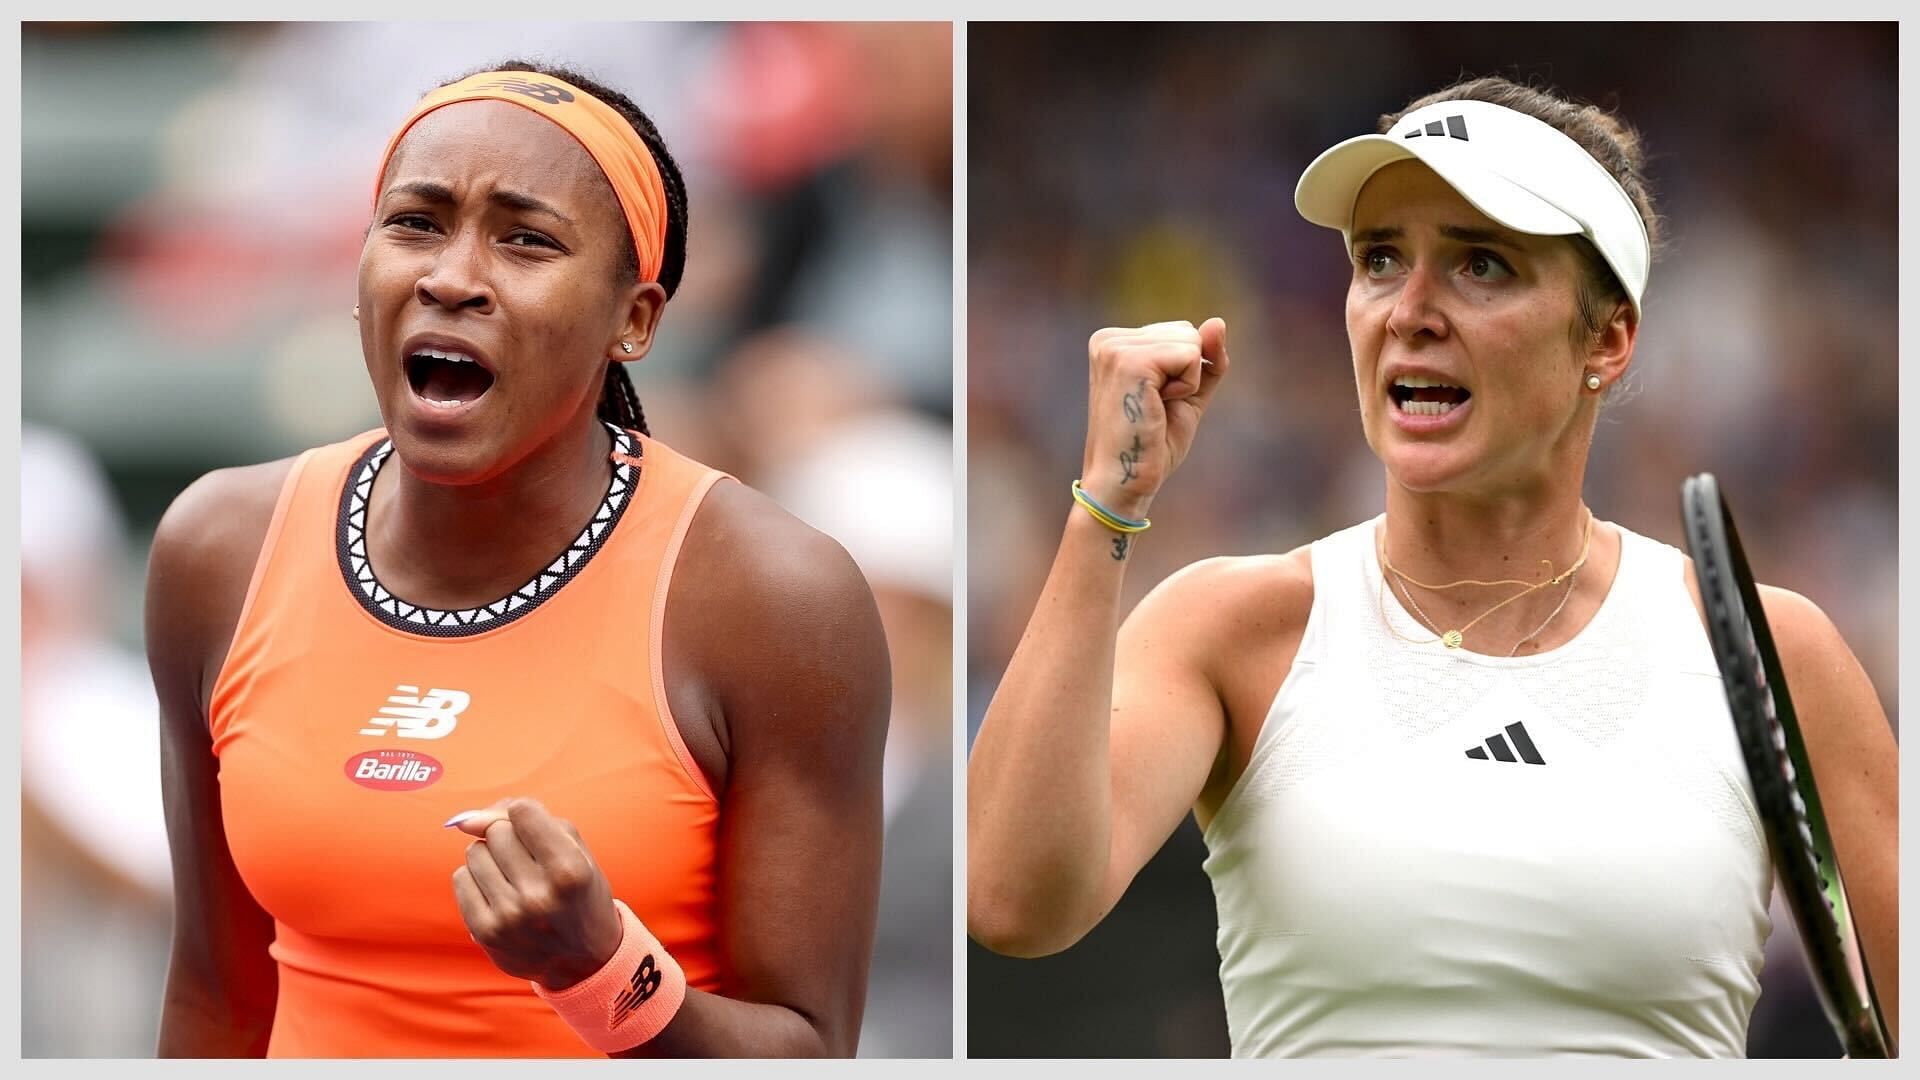 Gauff wil take on Svitolina in the ASB Classic final on Sunday